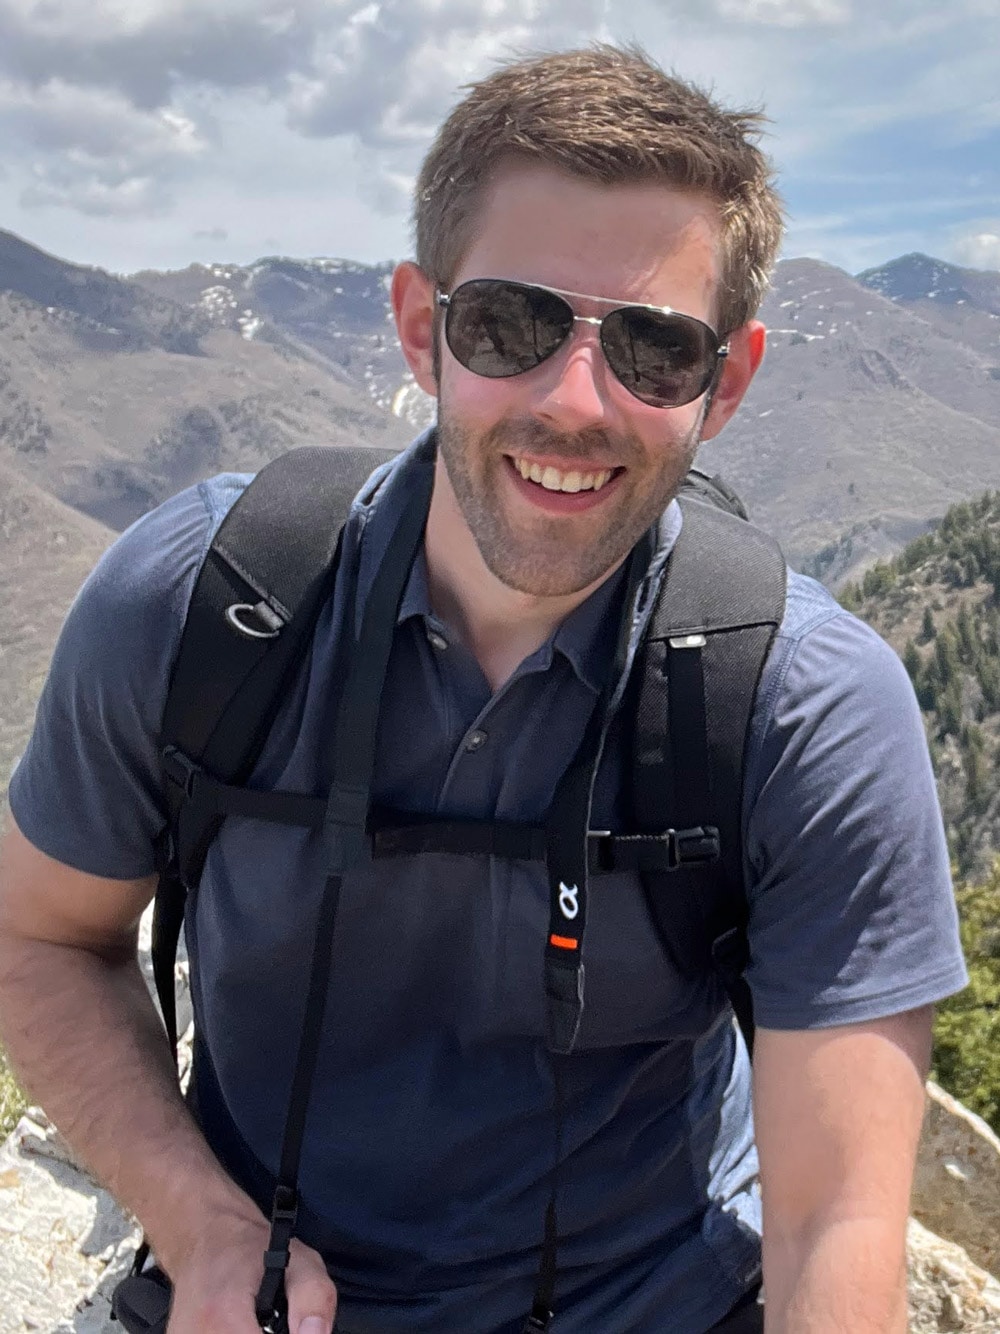 David Fox at the top of a mountain in Salt Lake City